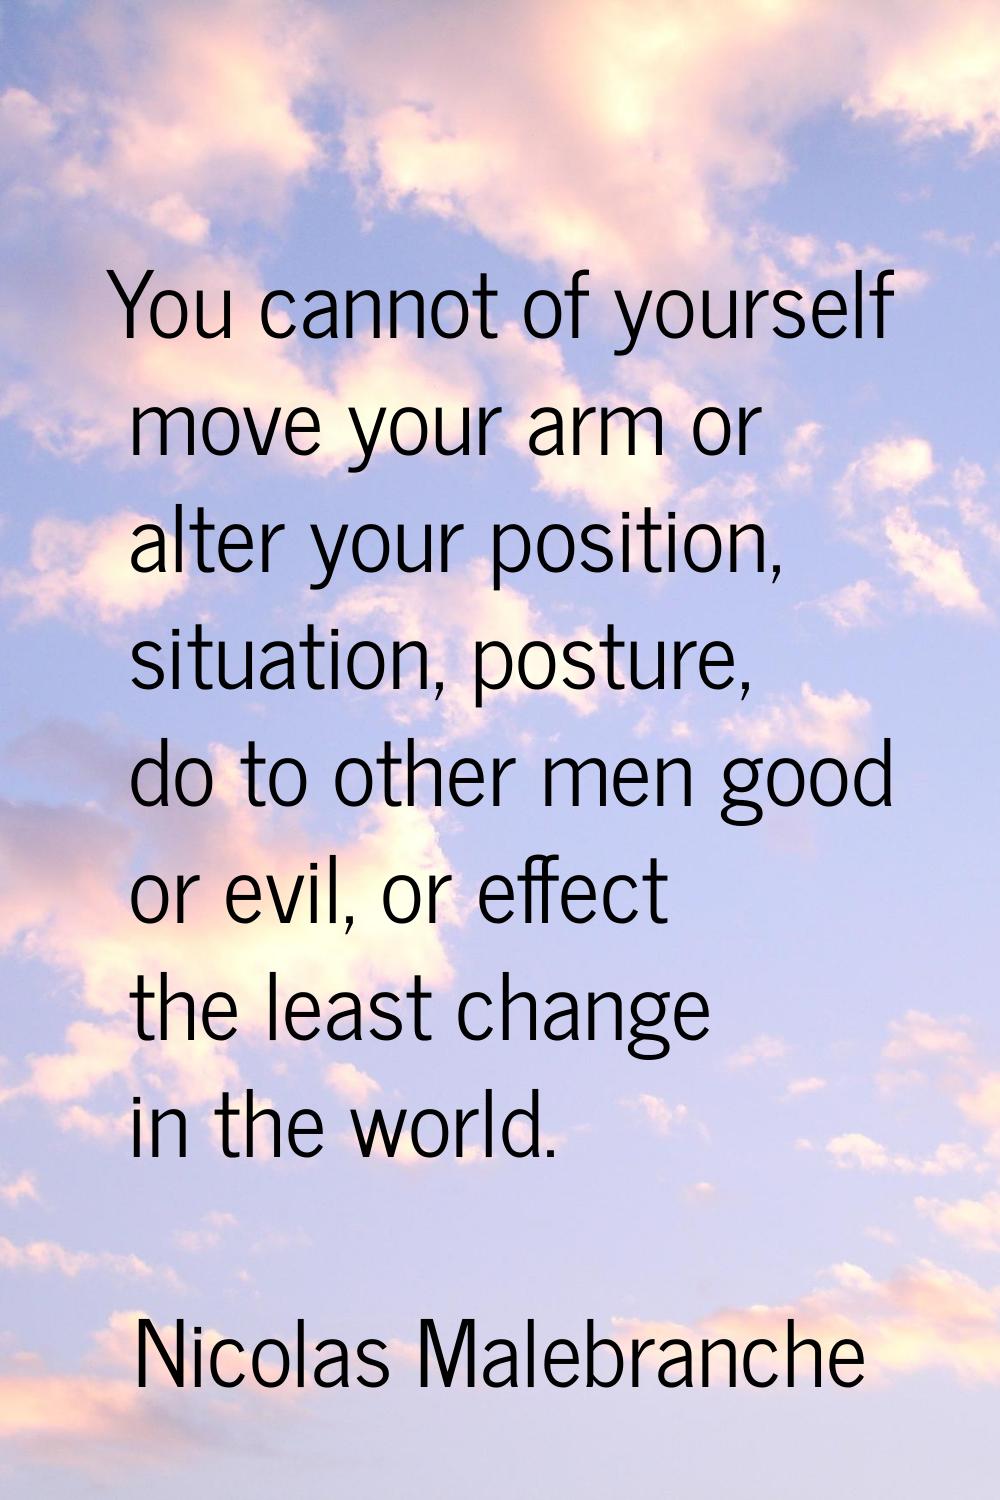 You cannot of yourself move your arm or alter your position, situation, posture, do to other men go